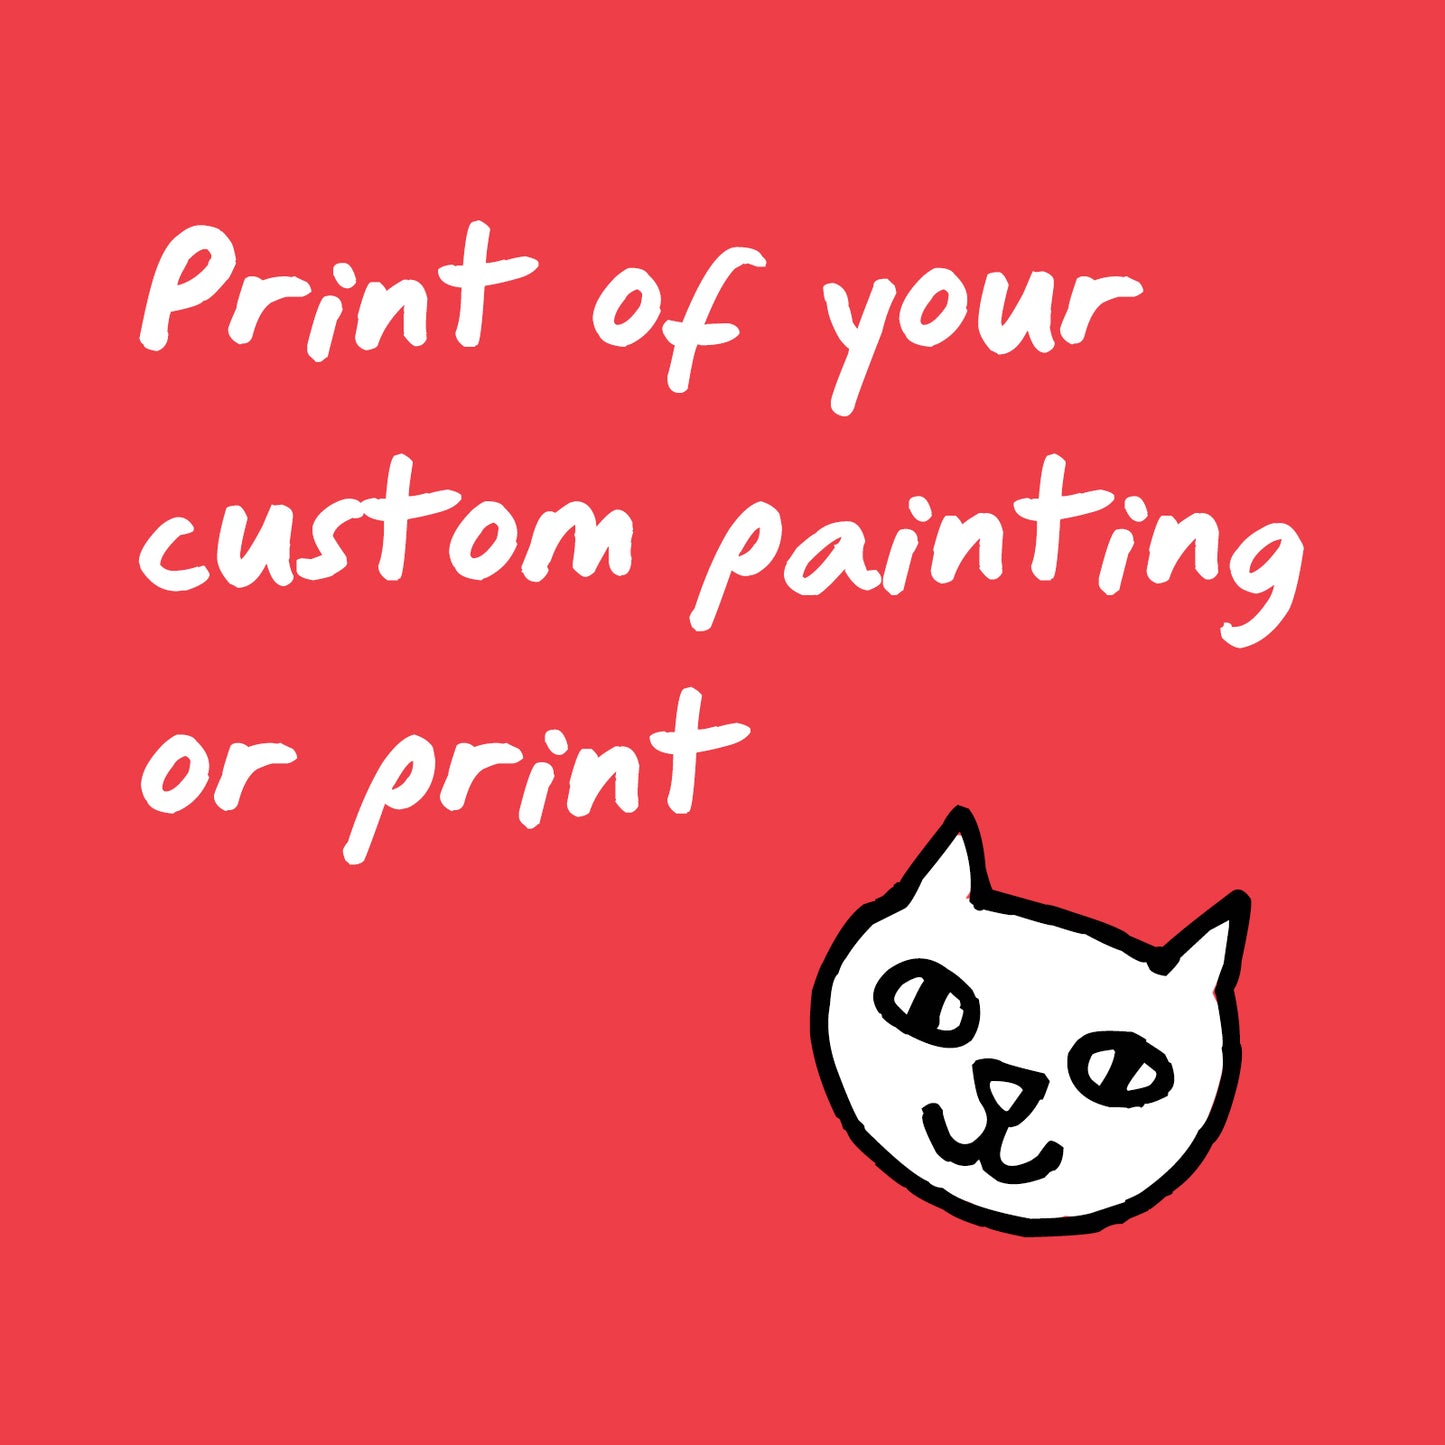 Print of Your Existing Custom Painting or Print